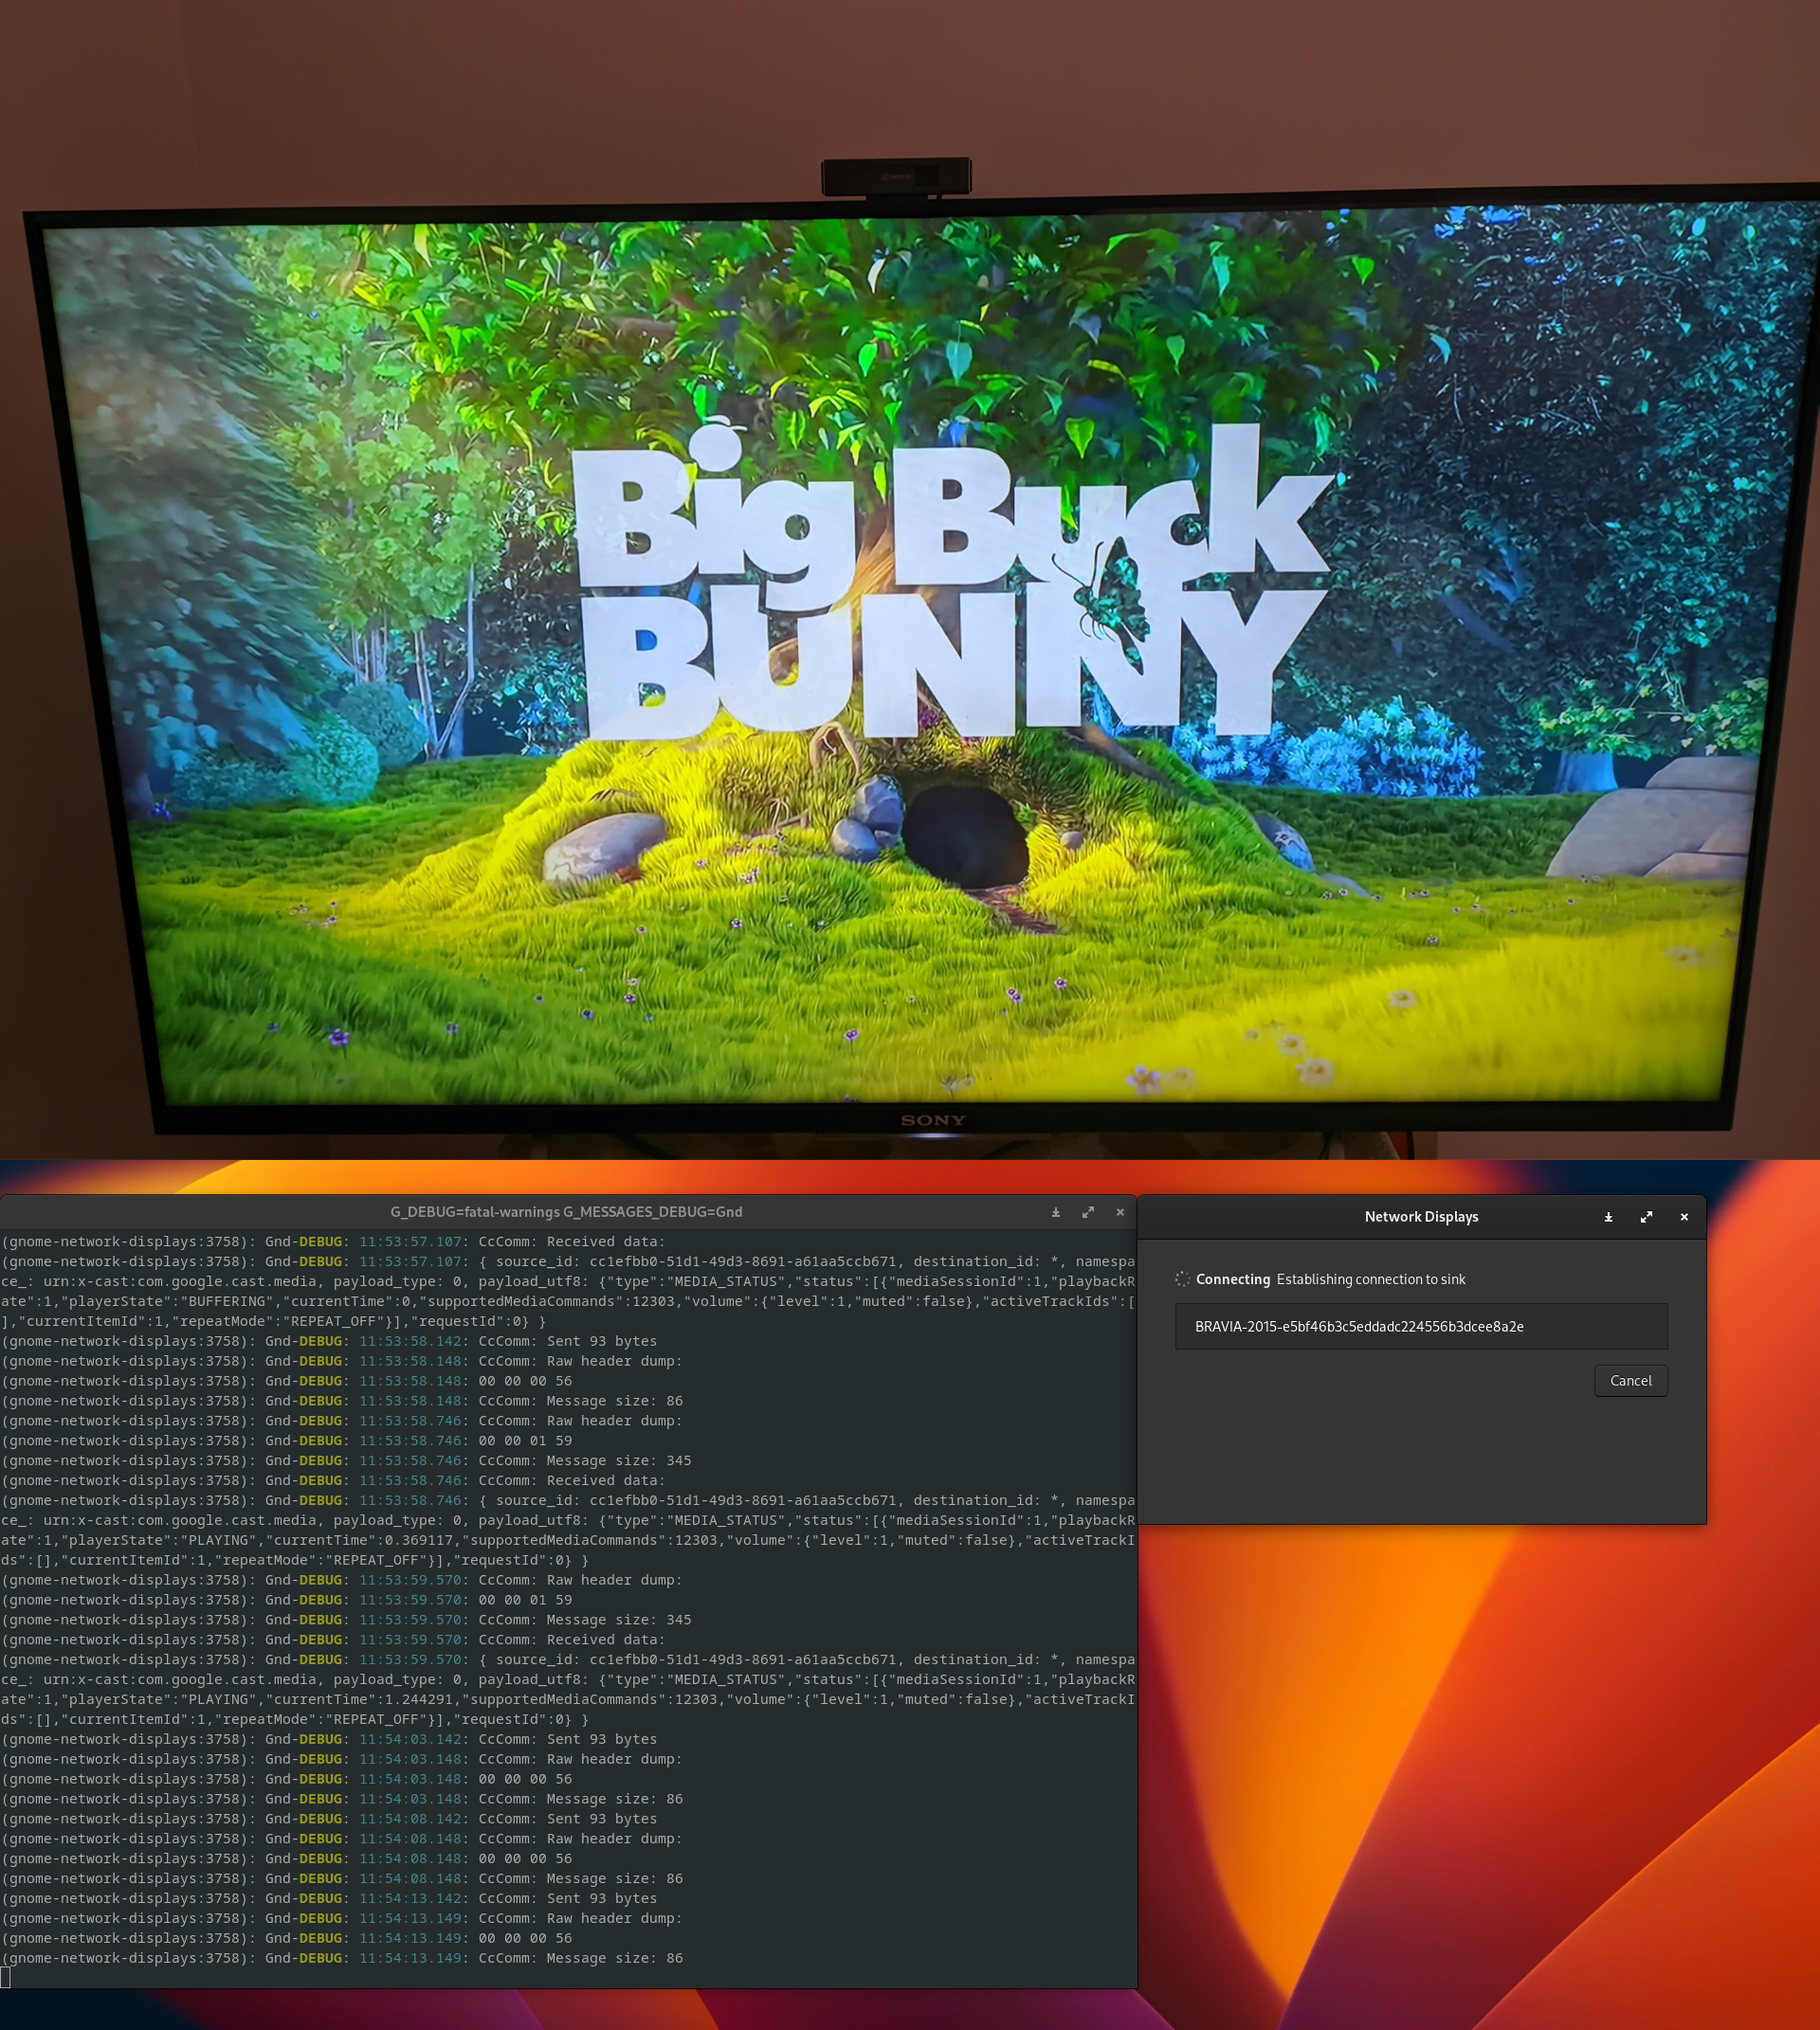 Big Buck Bunny clip playing on my TV (Chromecast built-in) and the GNOME Network Displays app